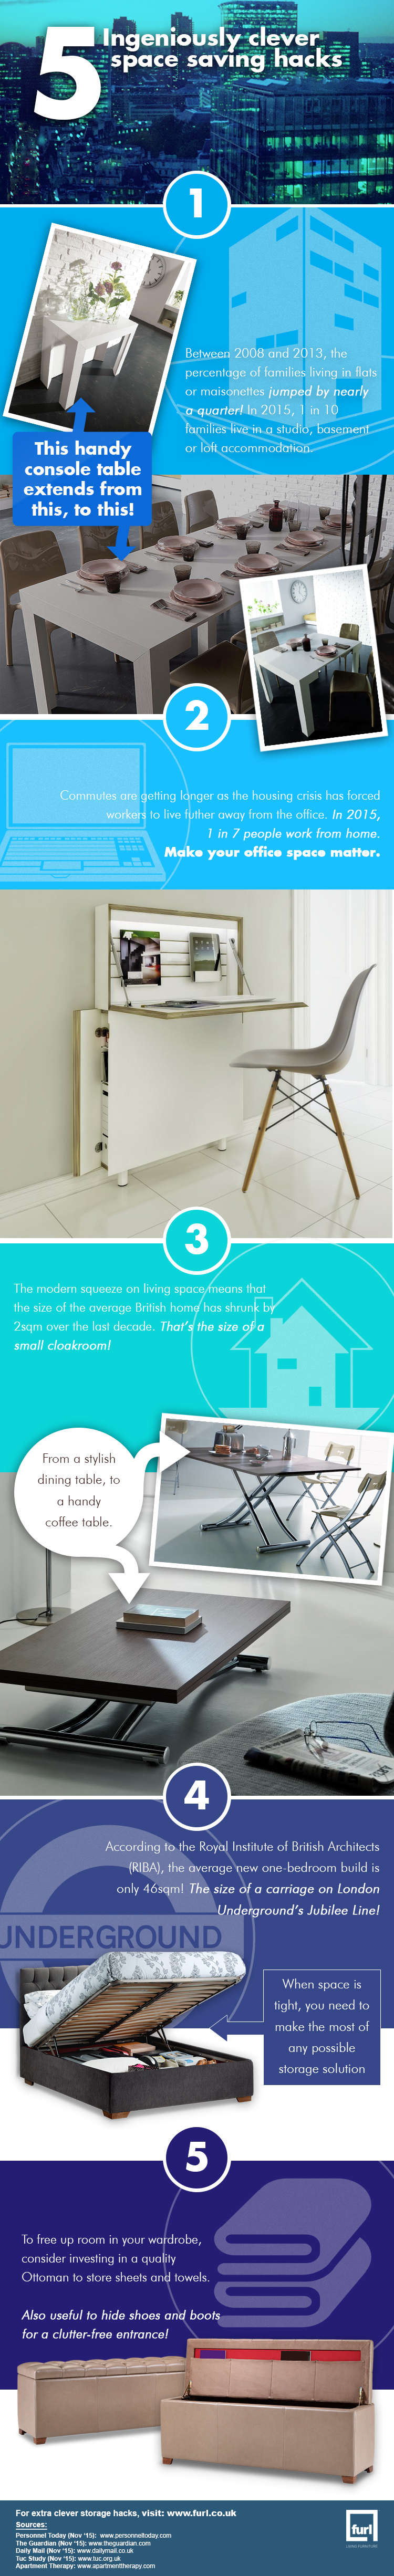 Try These 5 Cool Space Saving Hacks [Infographic]